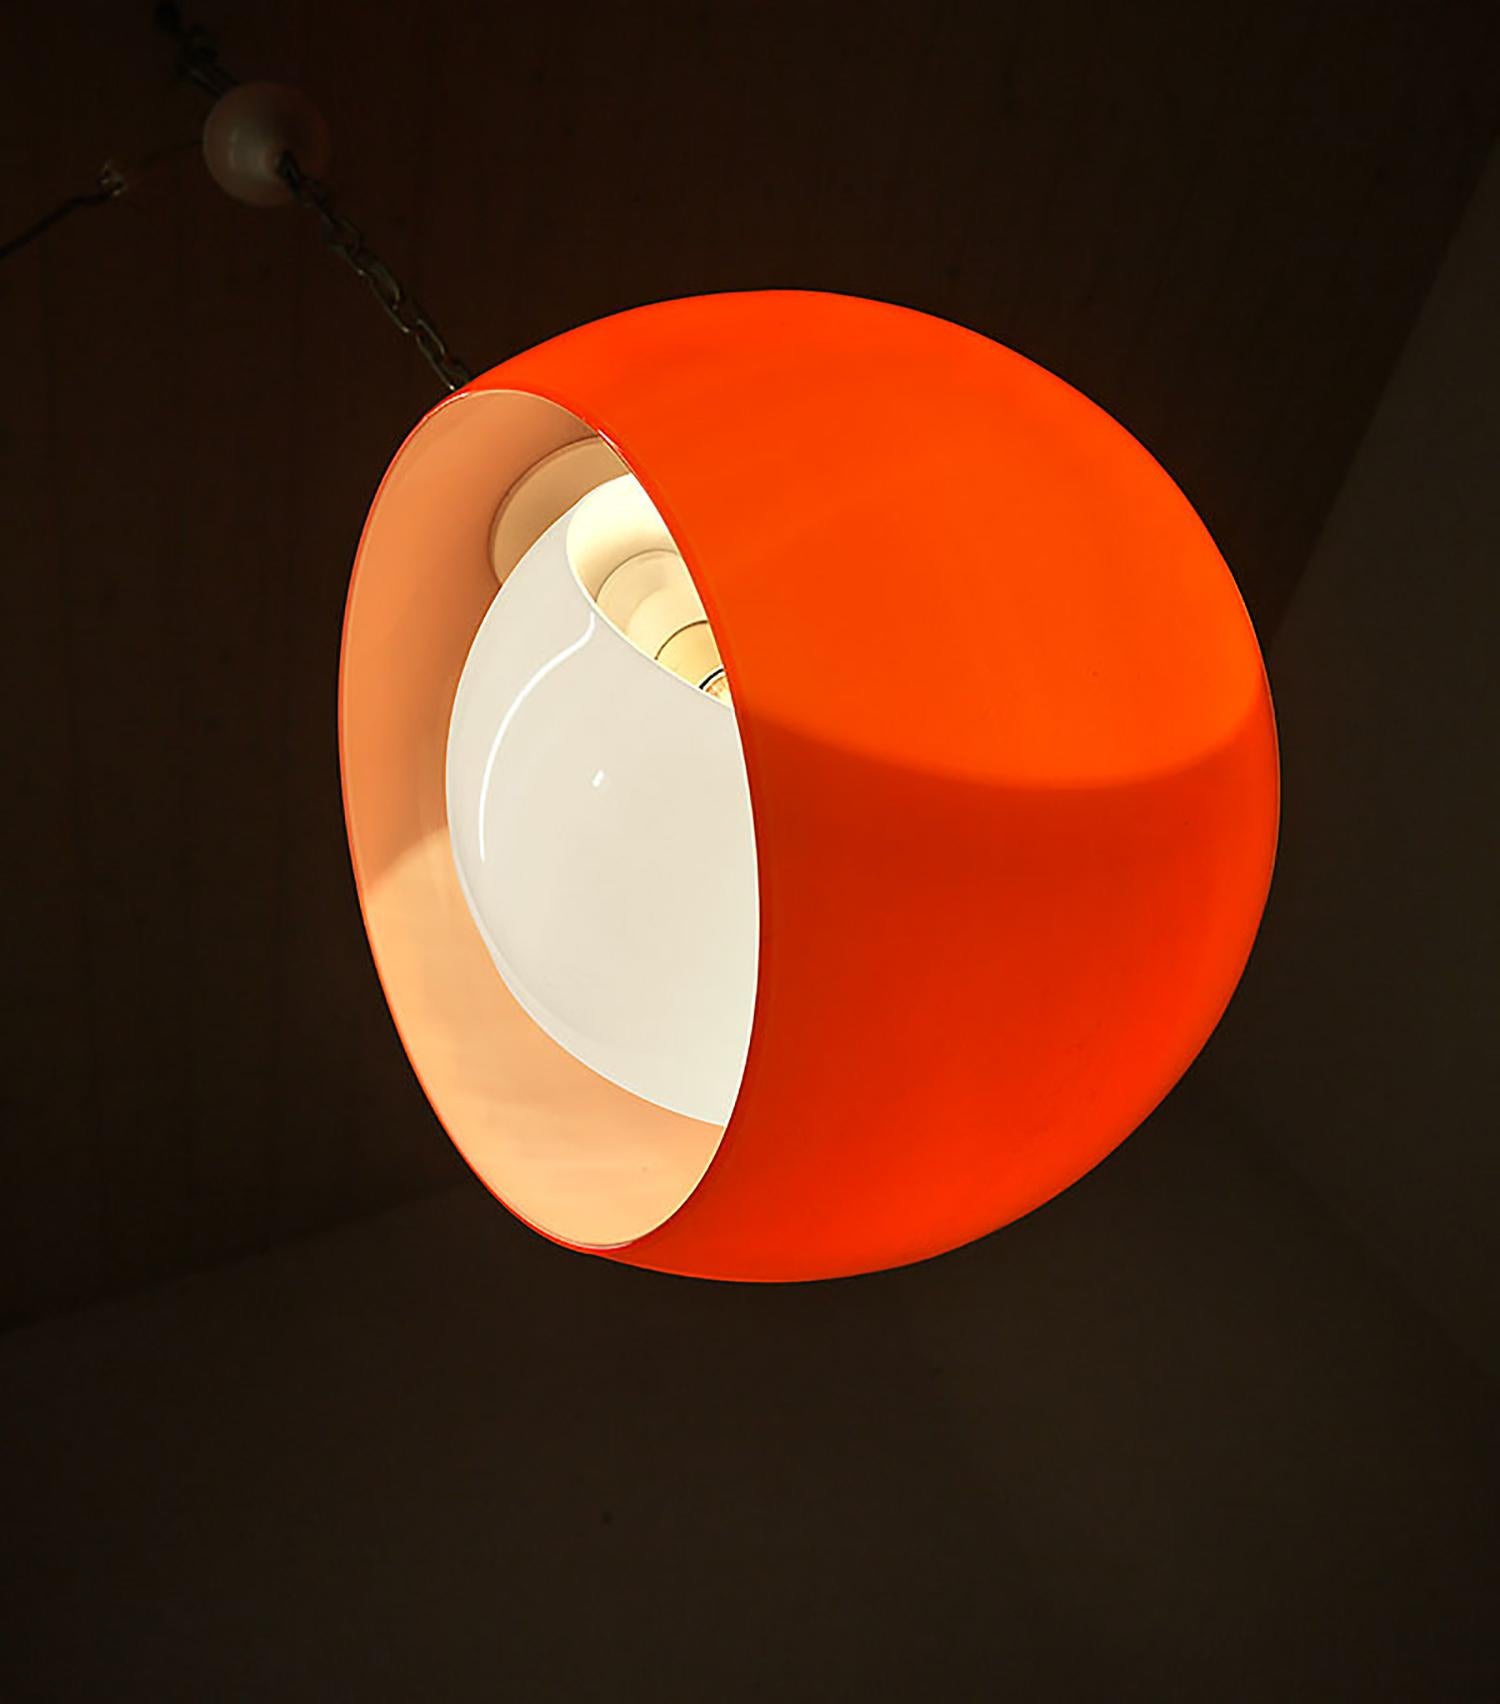 Hand-Crafted Murano Glass Moon Pendant Lamp Orange & White by Carlo Nason for Mazzega 1960s For Sale